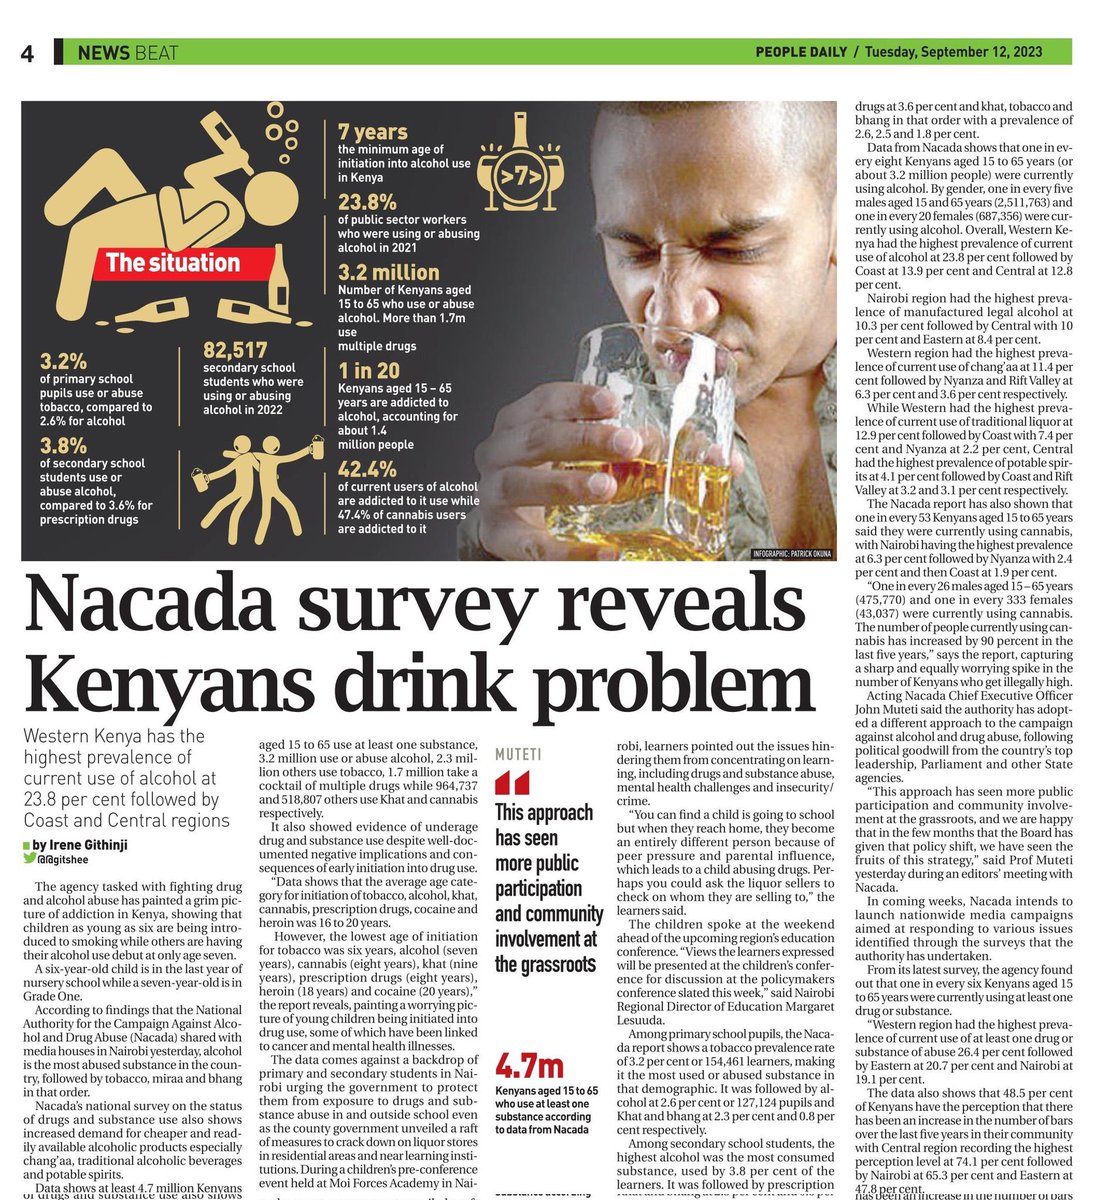 NACADA Survey reveals Kenyans drink problem 

1 in 20
Kenyans aged 15 - 65 years are addicted to alcohol, accounting for about 1.4 million people

#AlcPolPrio
#SCADCares 
#AlcoholTaxKE 
#AlcoholAwareness 
#AlcoholAwarenessKE